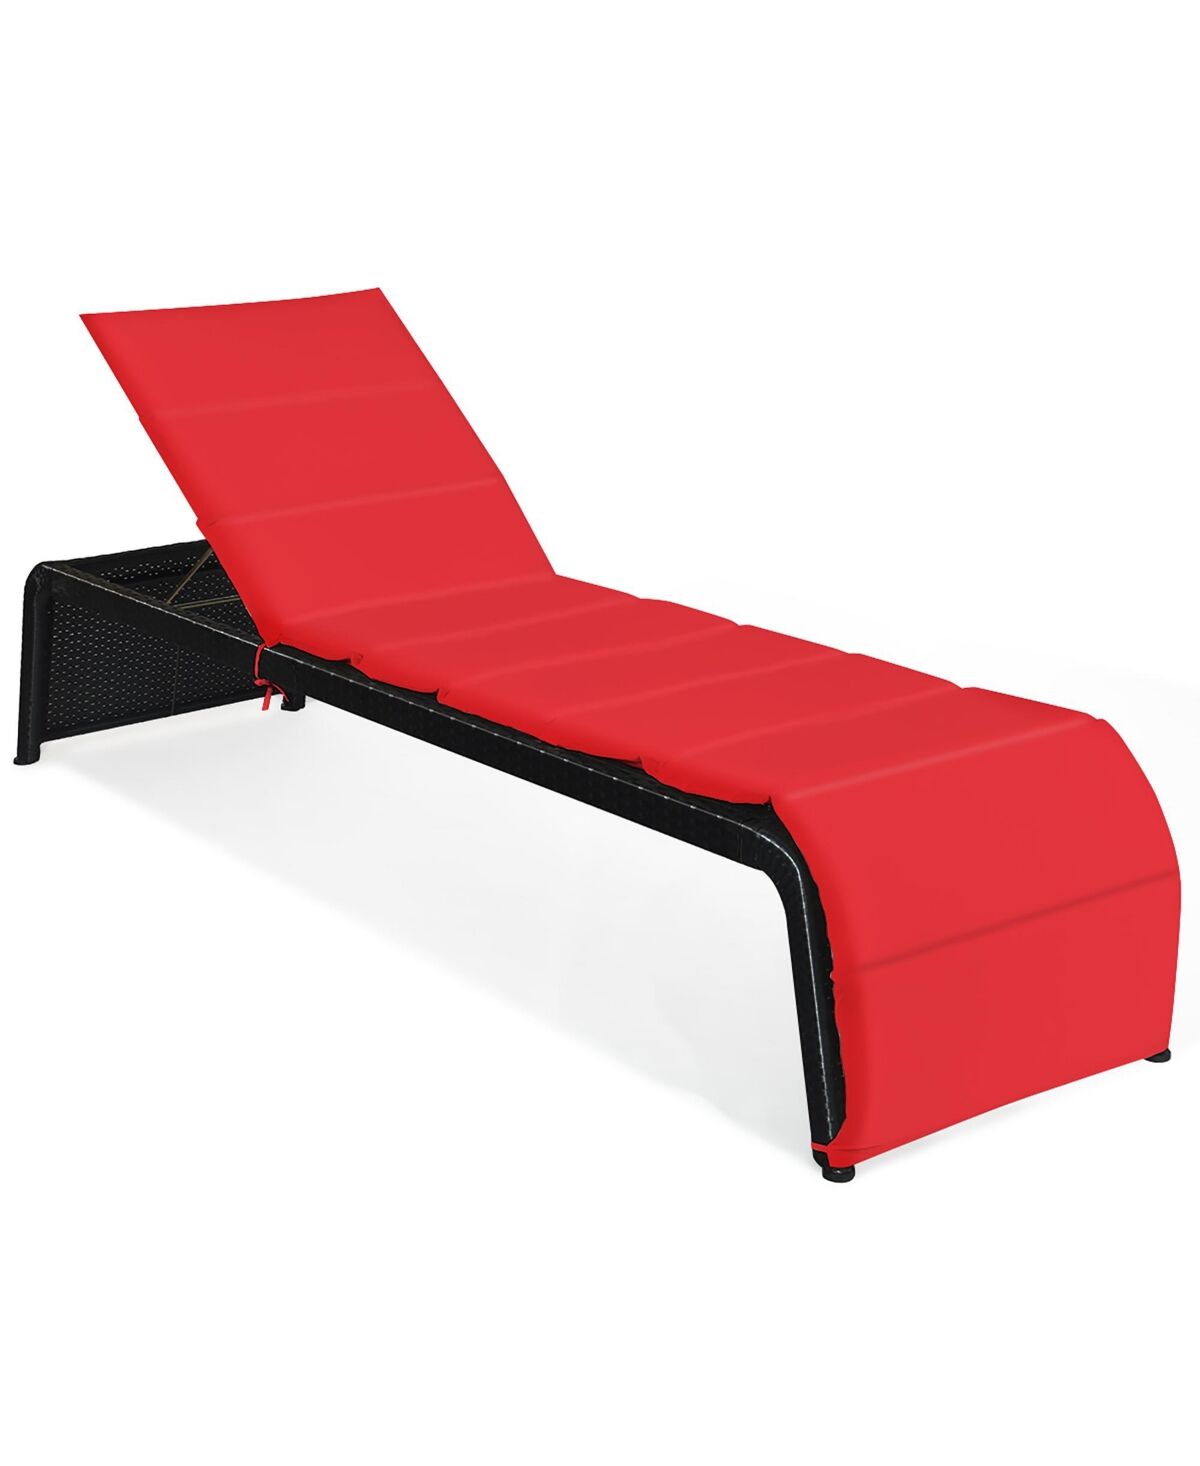 Costway Patio Rattan Lounge Chair Chaise Recliner Back Adjustable Cushioned Garden - Red